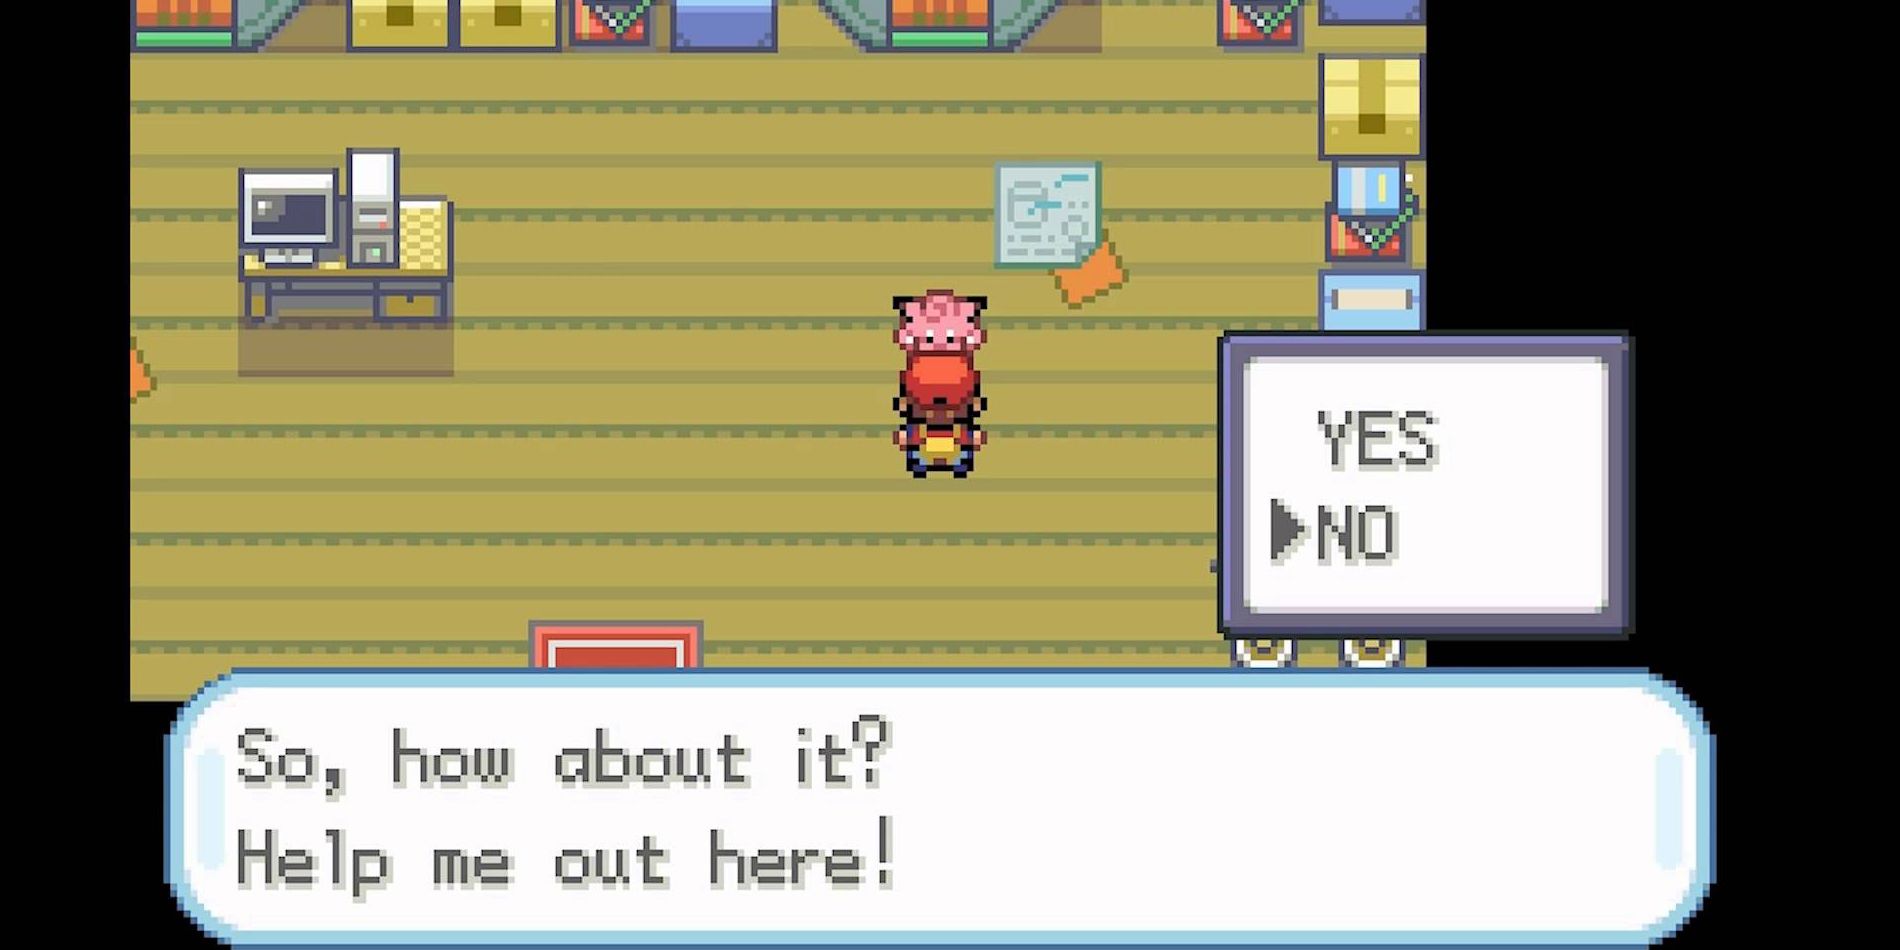 15 Hidden Messages In Pokémon Red Blue And Yellow They Don’t Think You’ll Notice